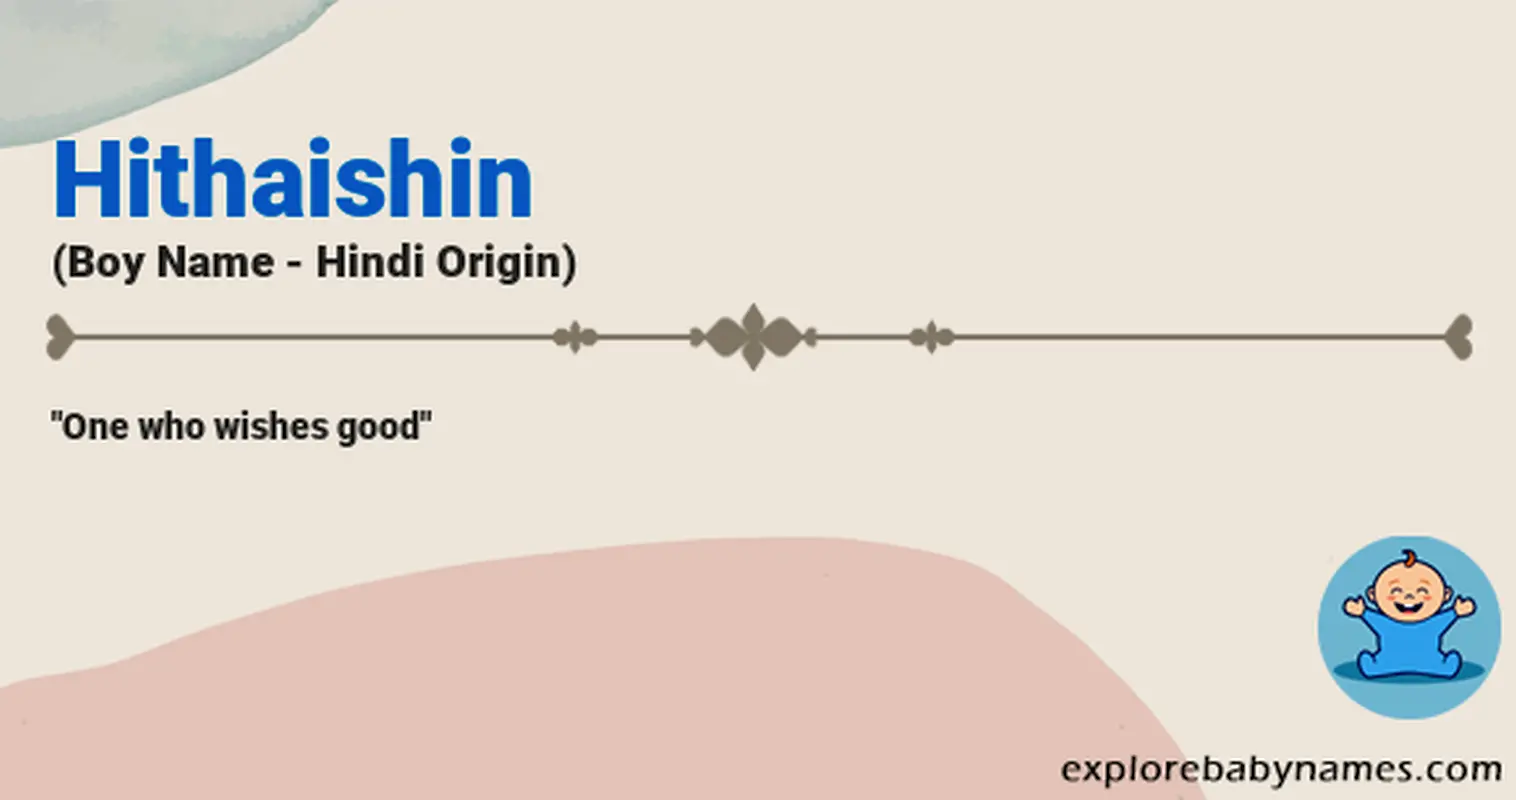 Meaning of Hithaishin